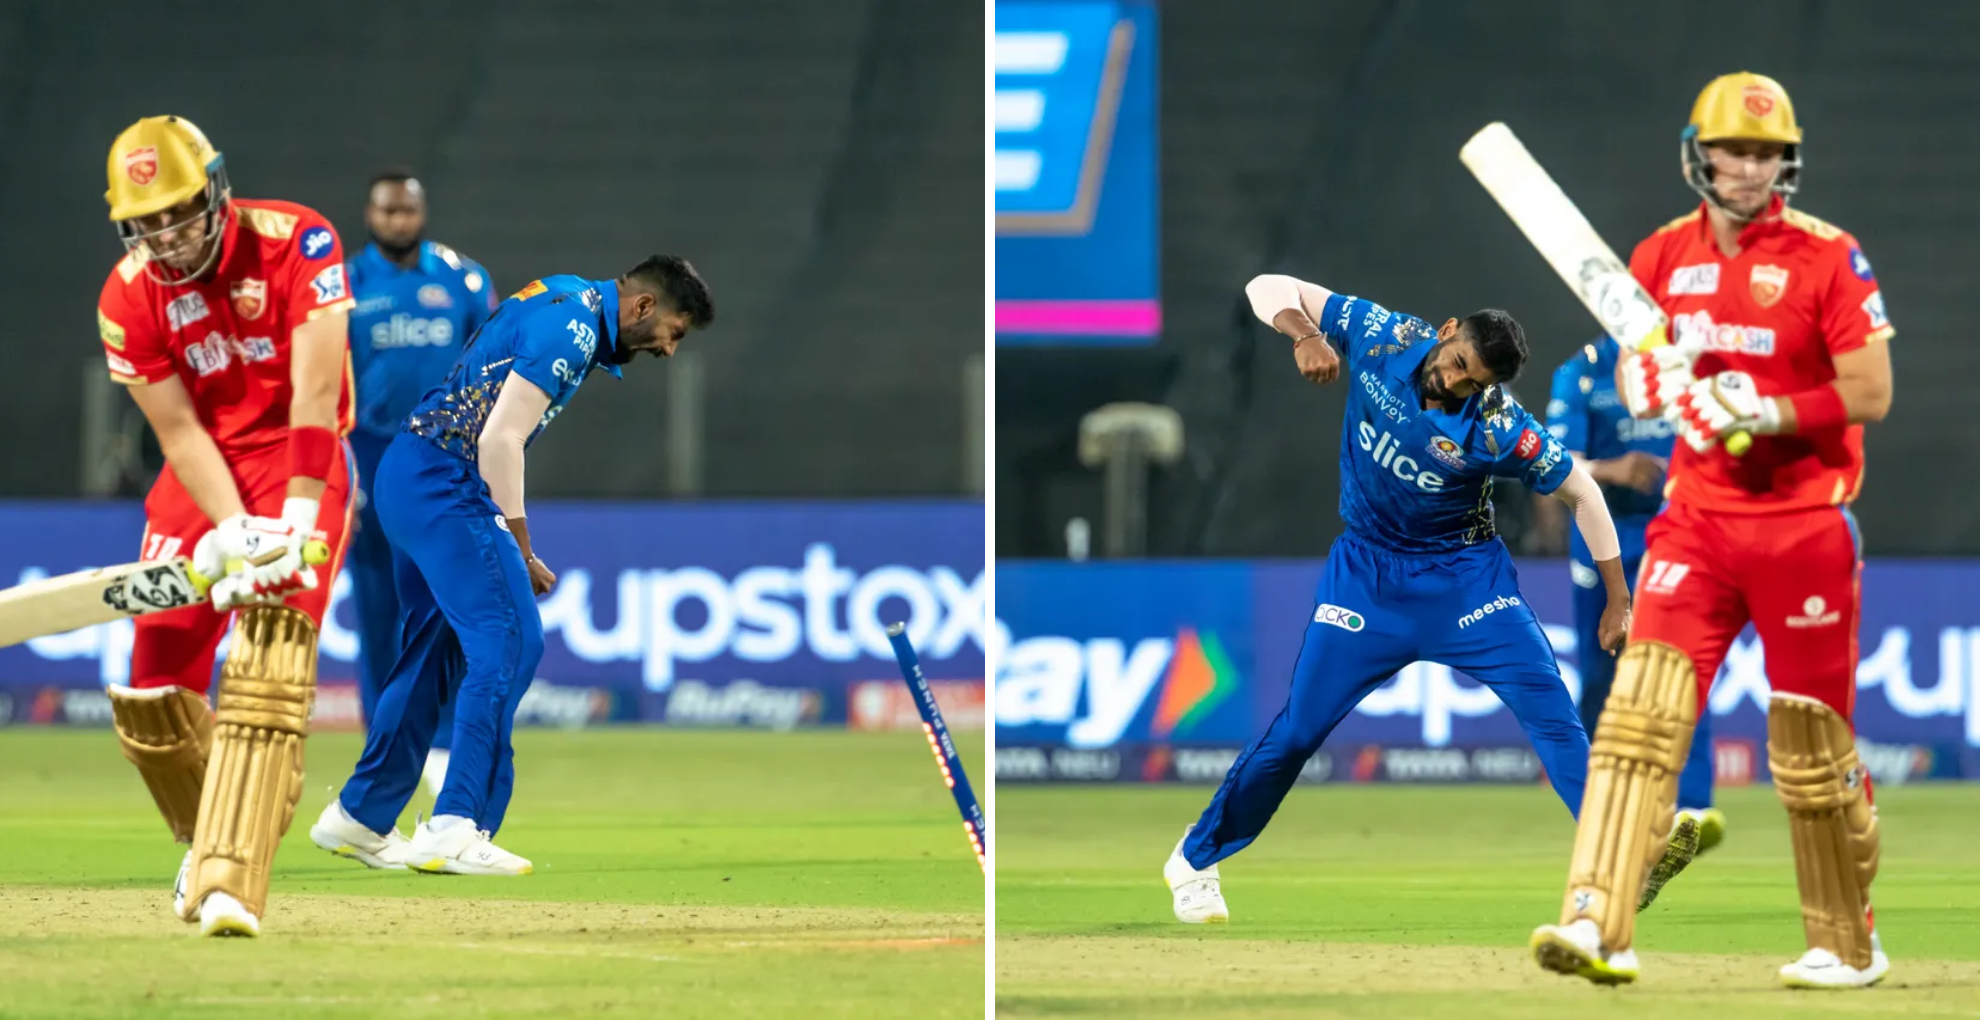 [Watch] Jasprit Bumrah Rattles Liam Livingstone With A Toe-Crushing Yorker